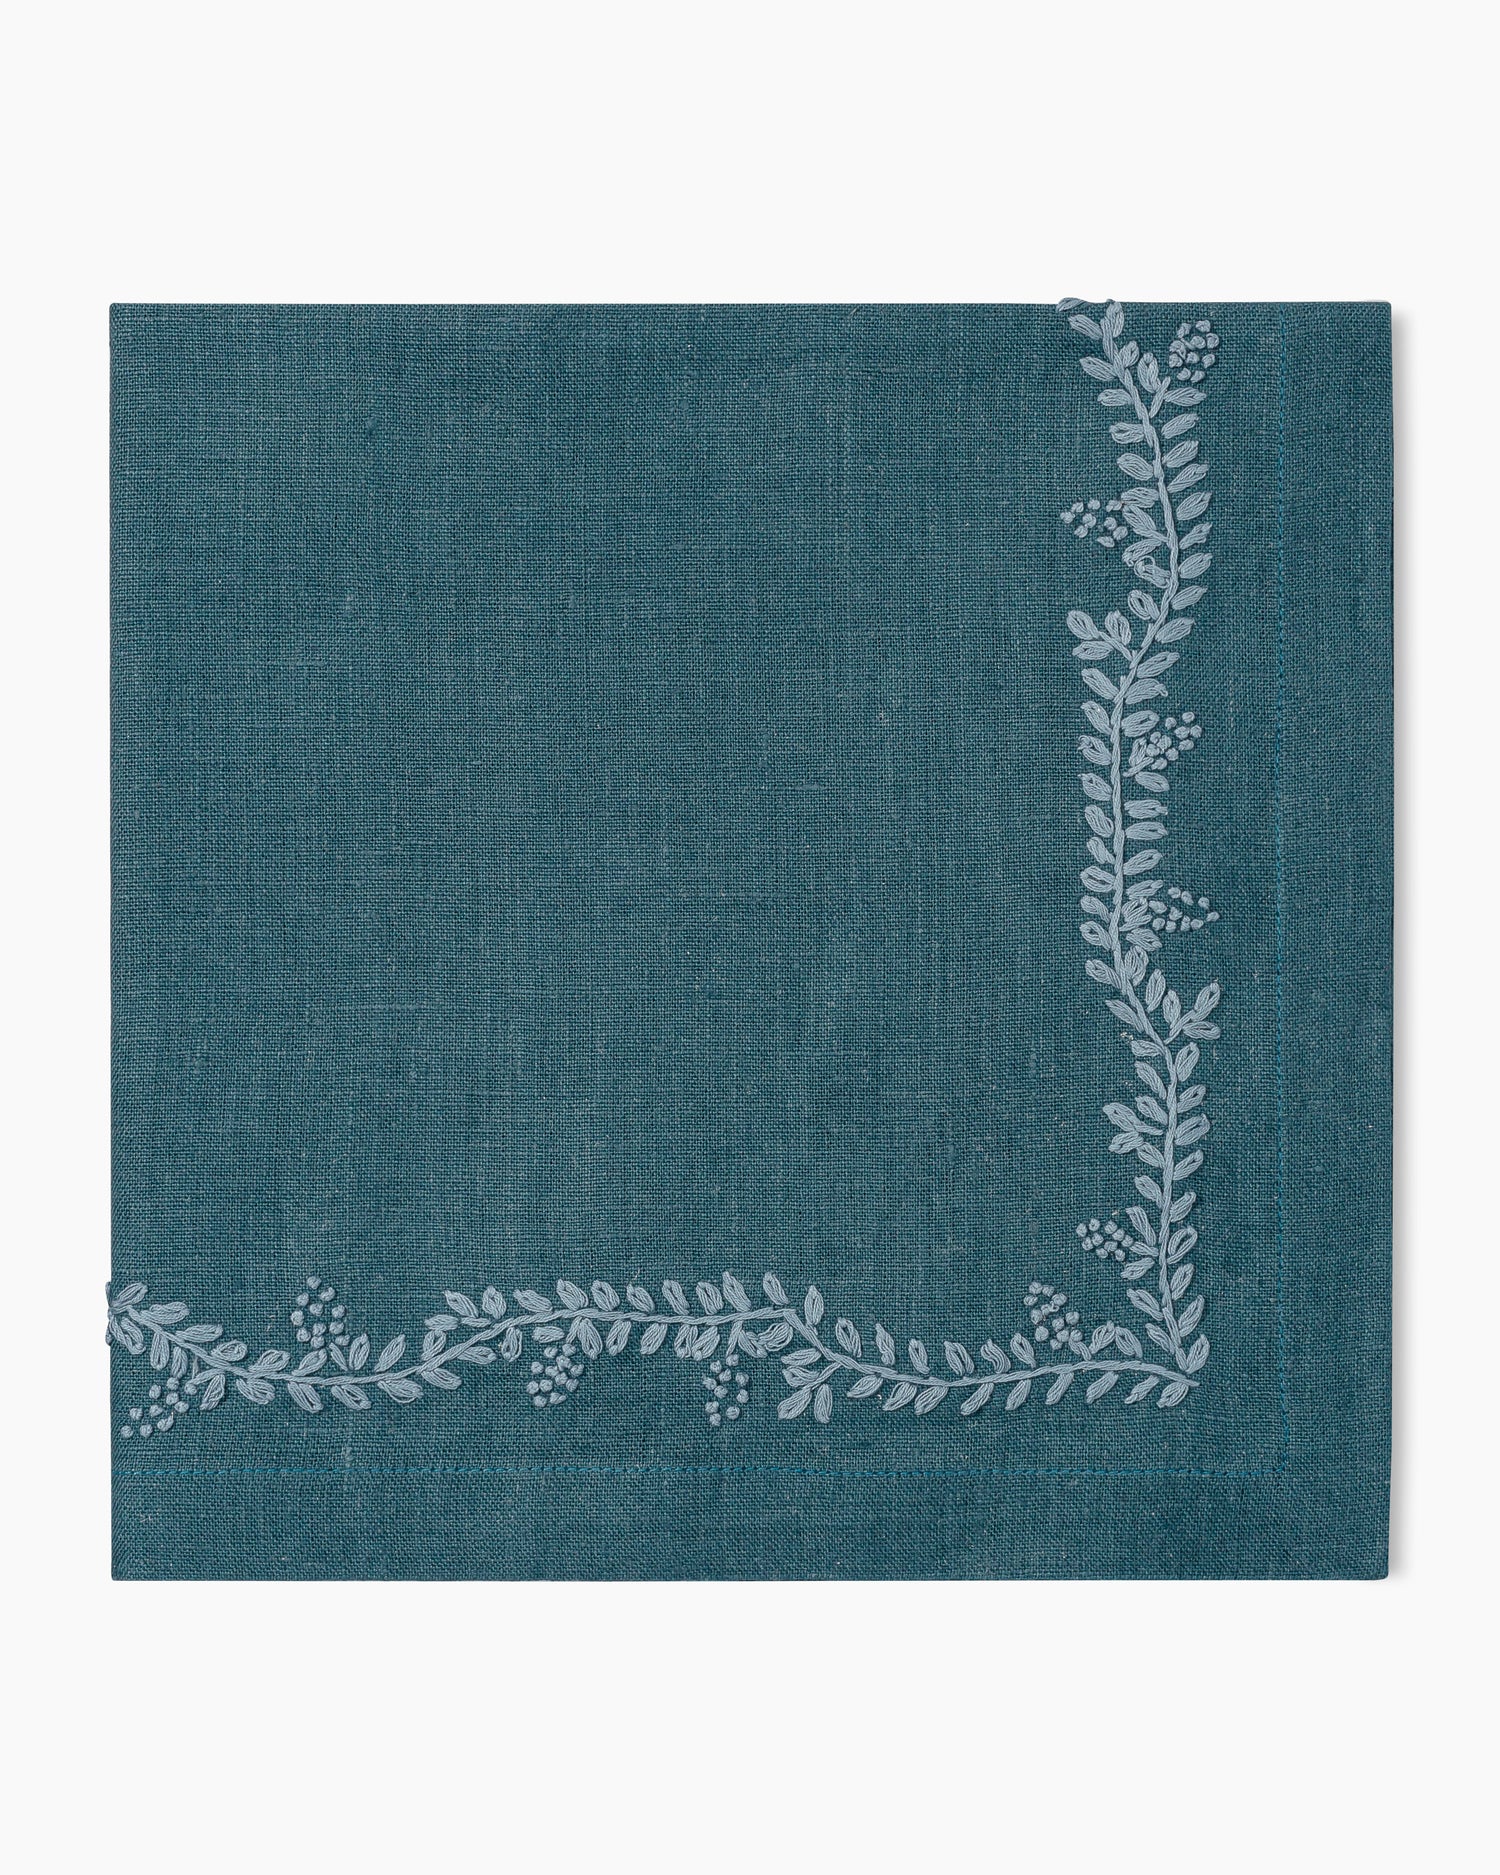 A Prism Vine Linen Dinner Napkin - 13 Colors with a floral pattern, perfect for enhancing your table linens collection.